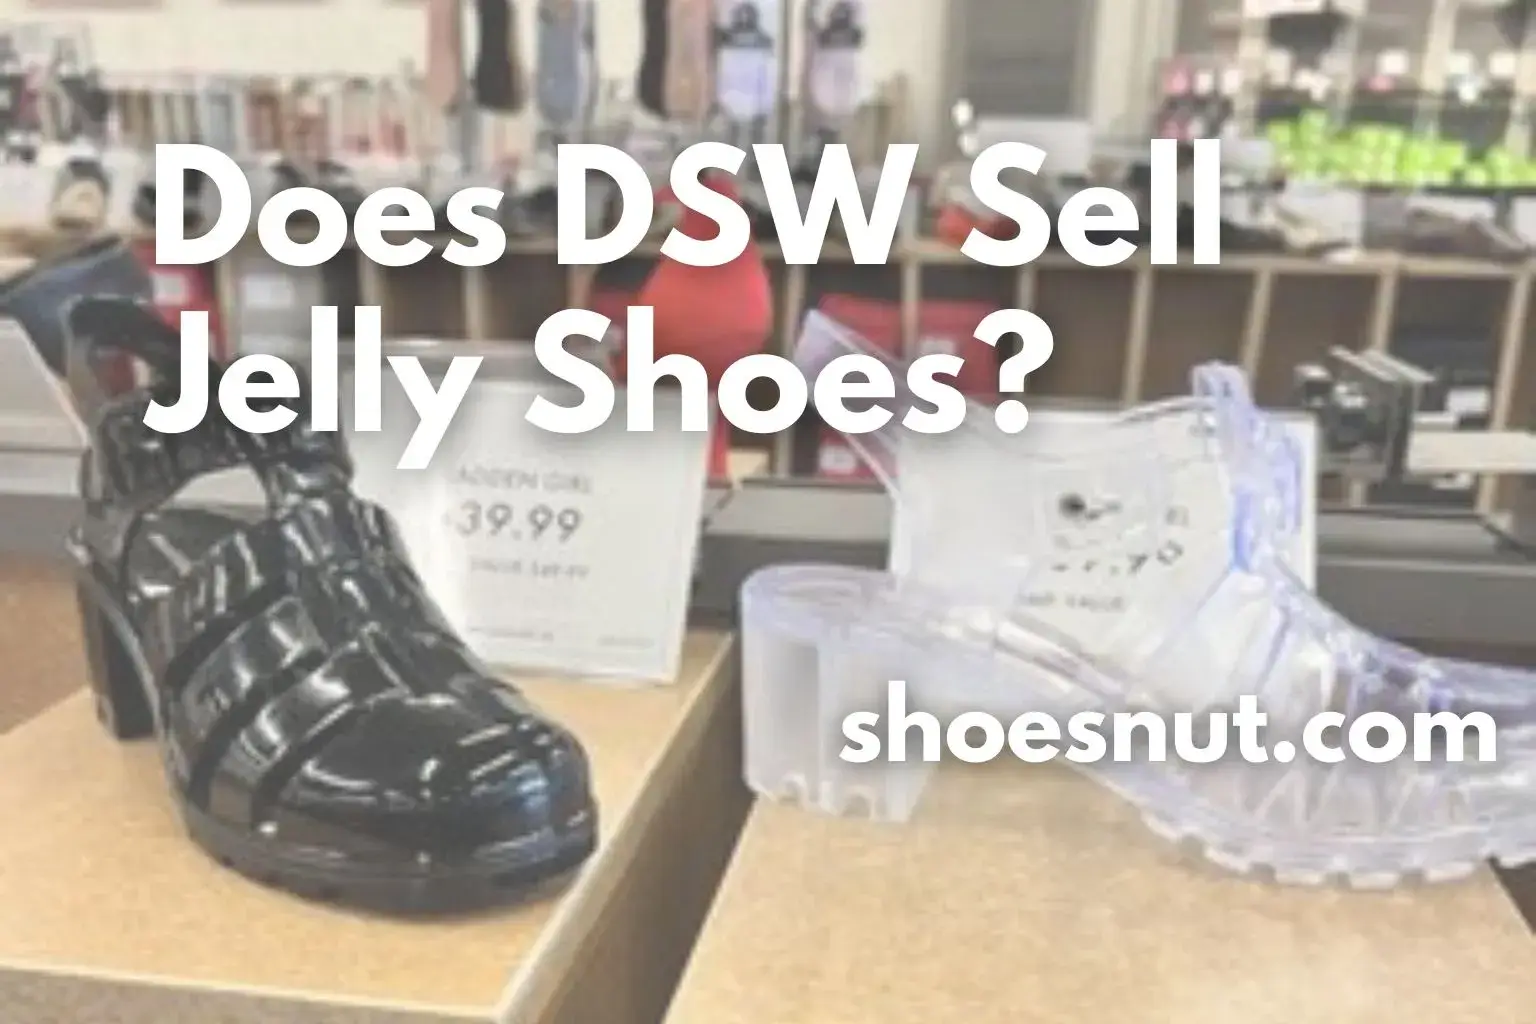 Does DSW Sell Jelly Shoes?